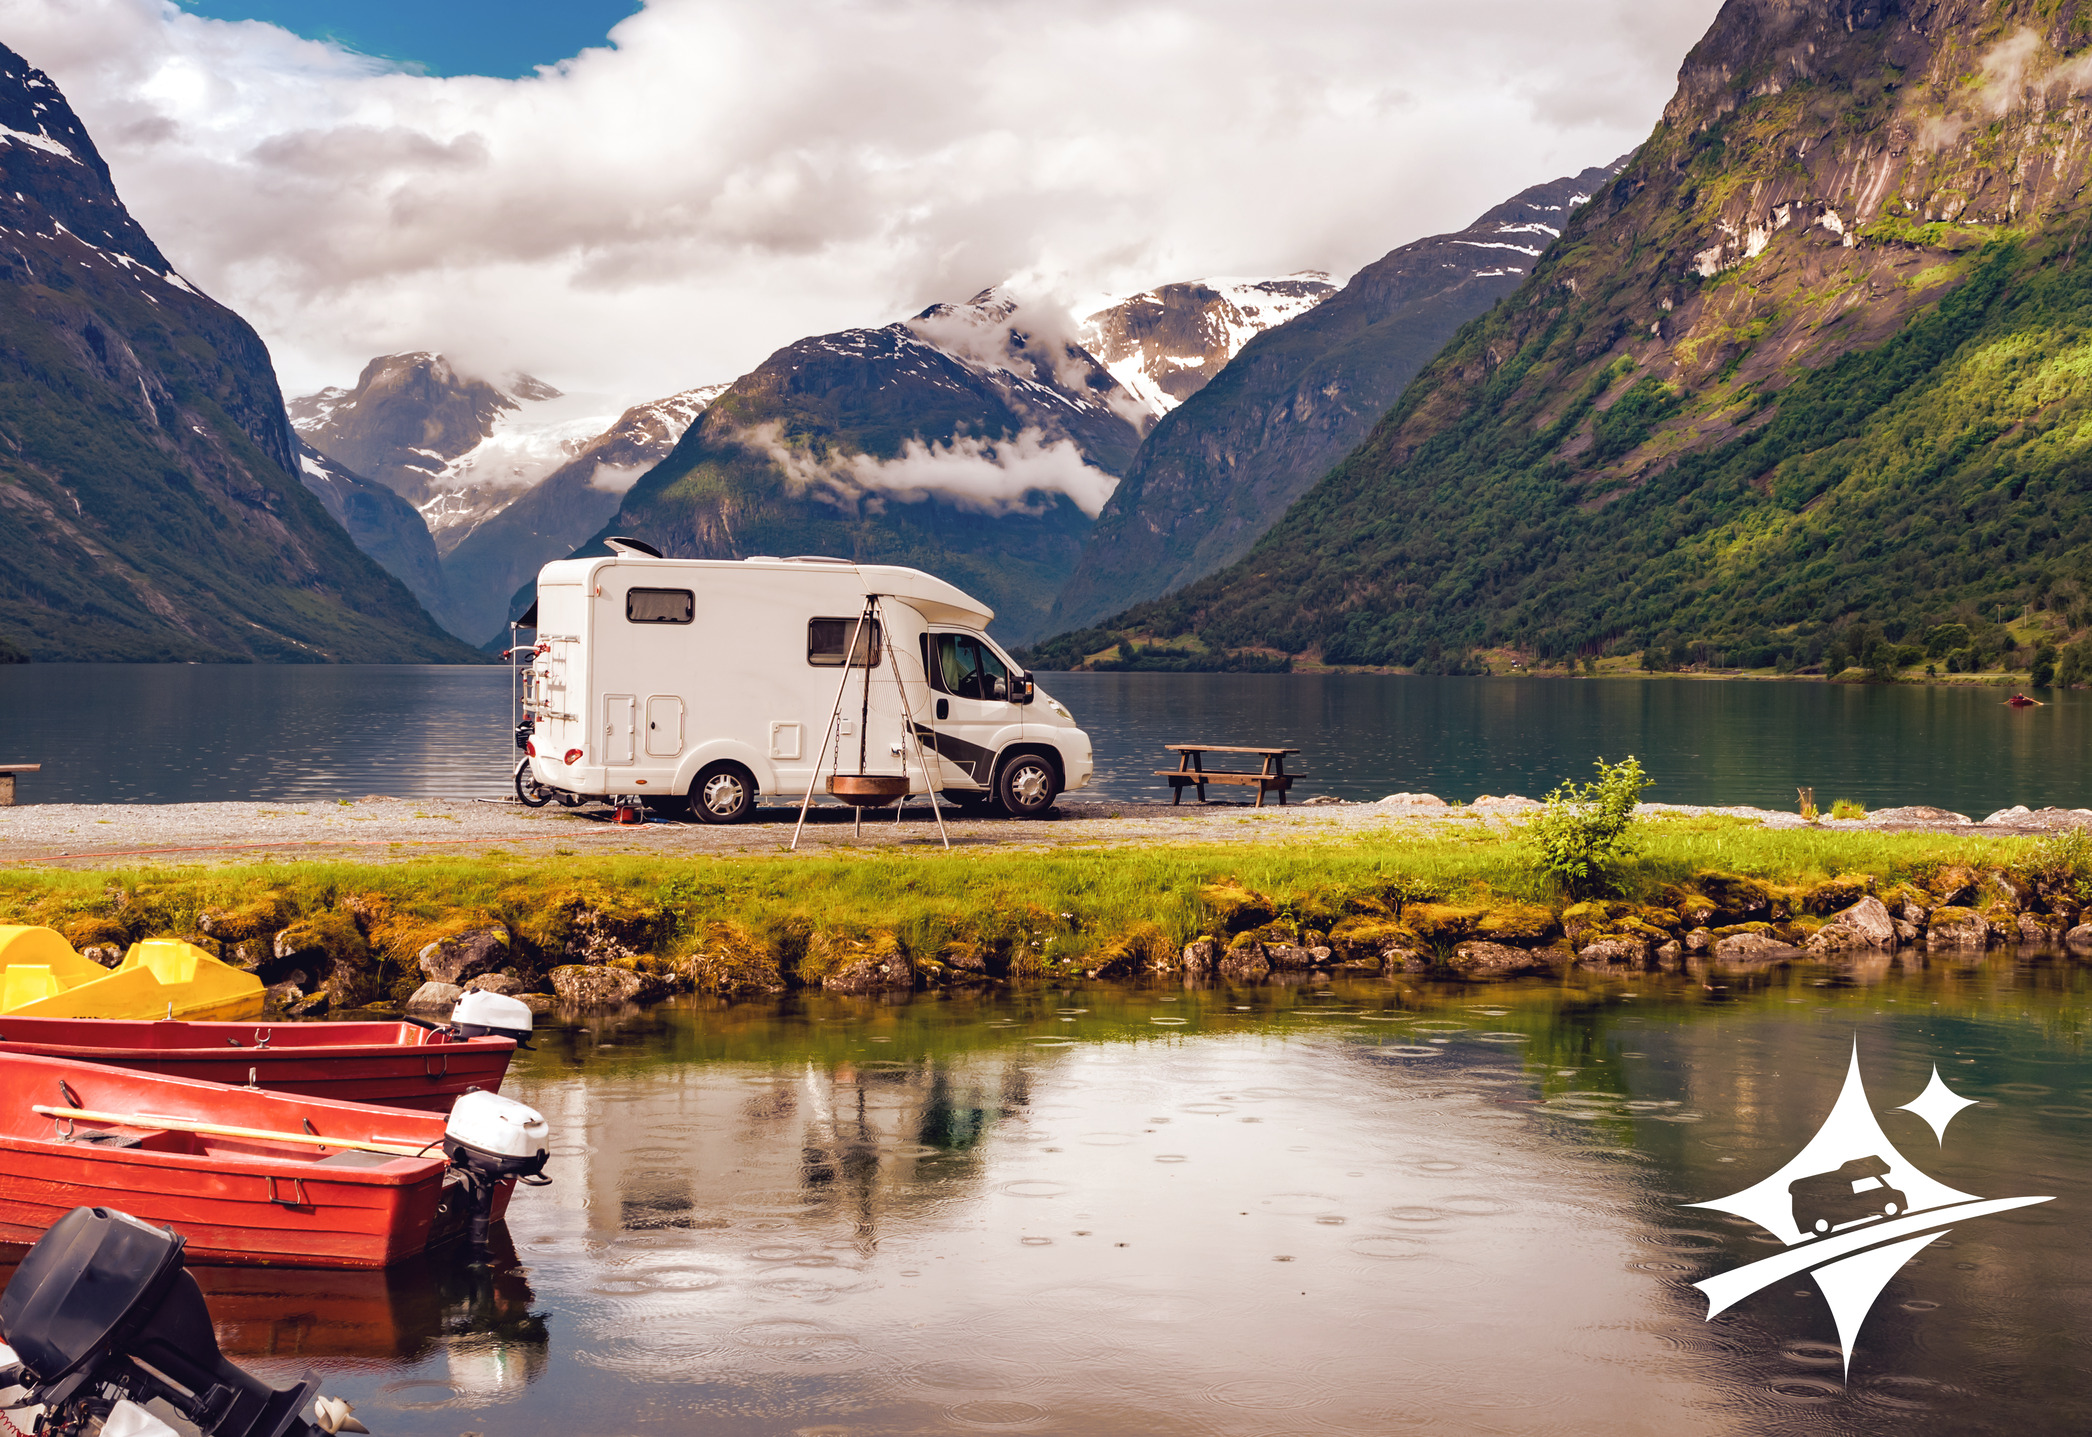 AdventureGenie can create an entire RV journey customized for you.